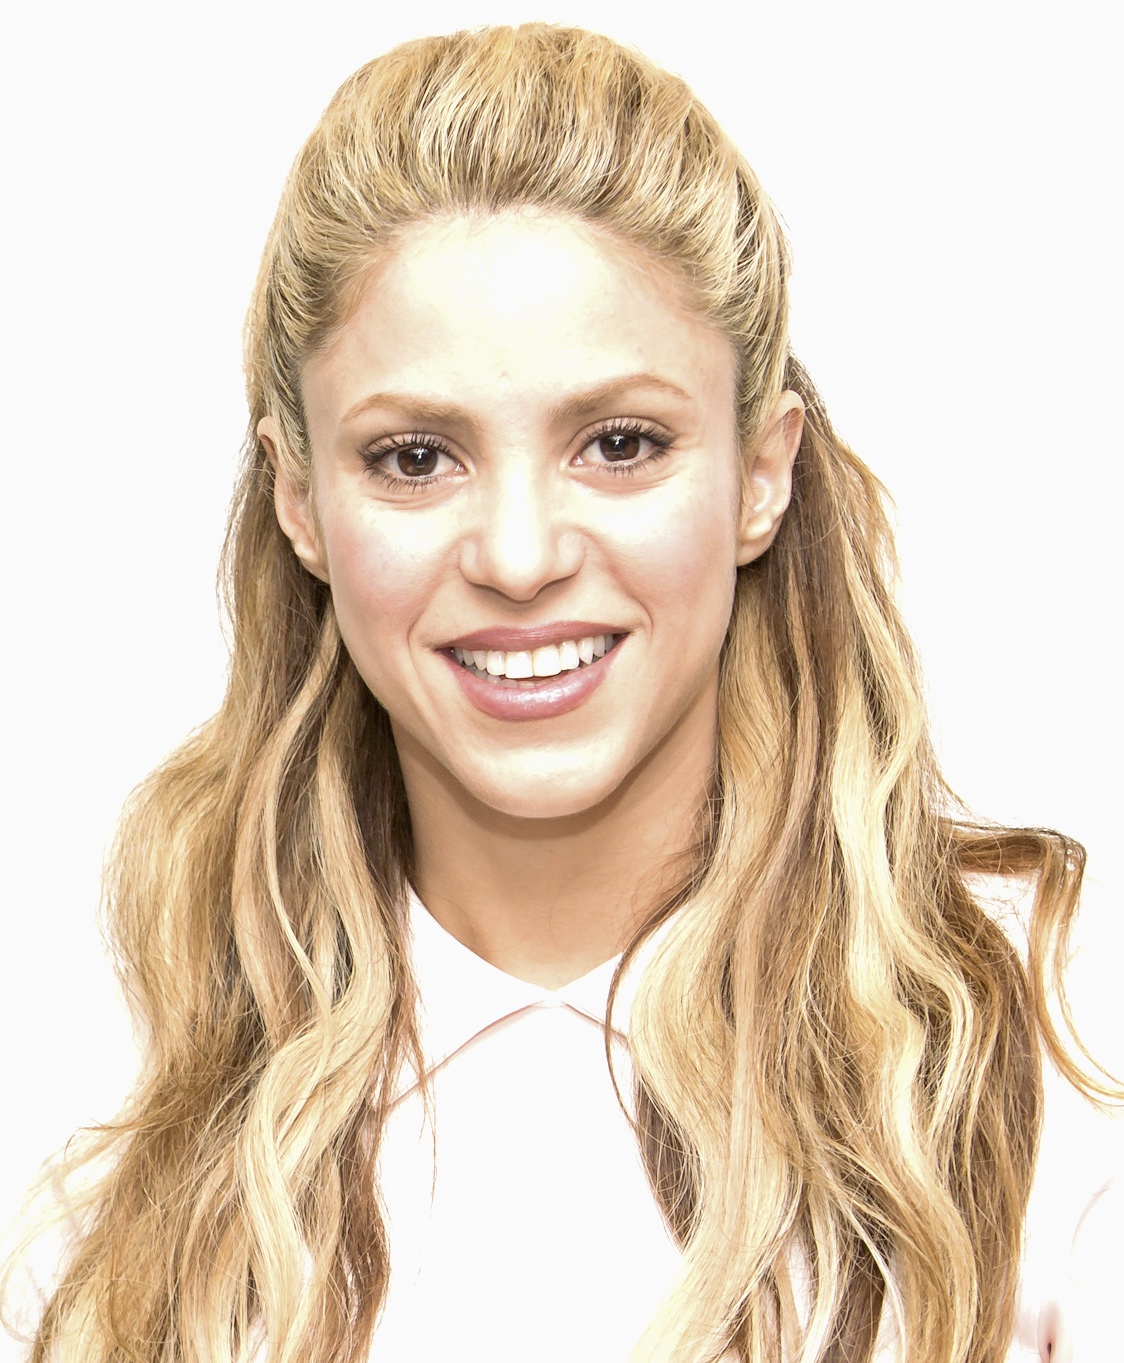 Shakira: Latest news and pictures of the Colombian singer - HELLO!